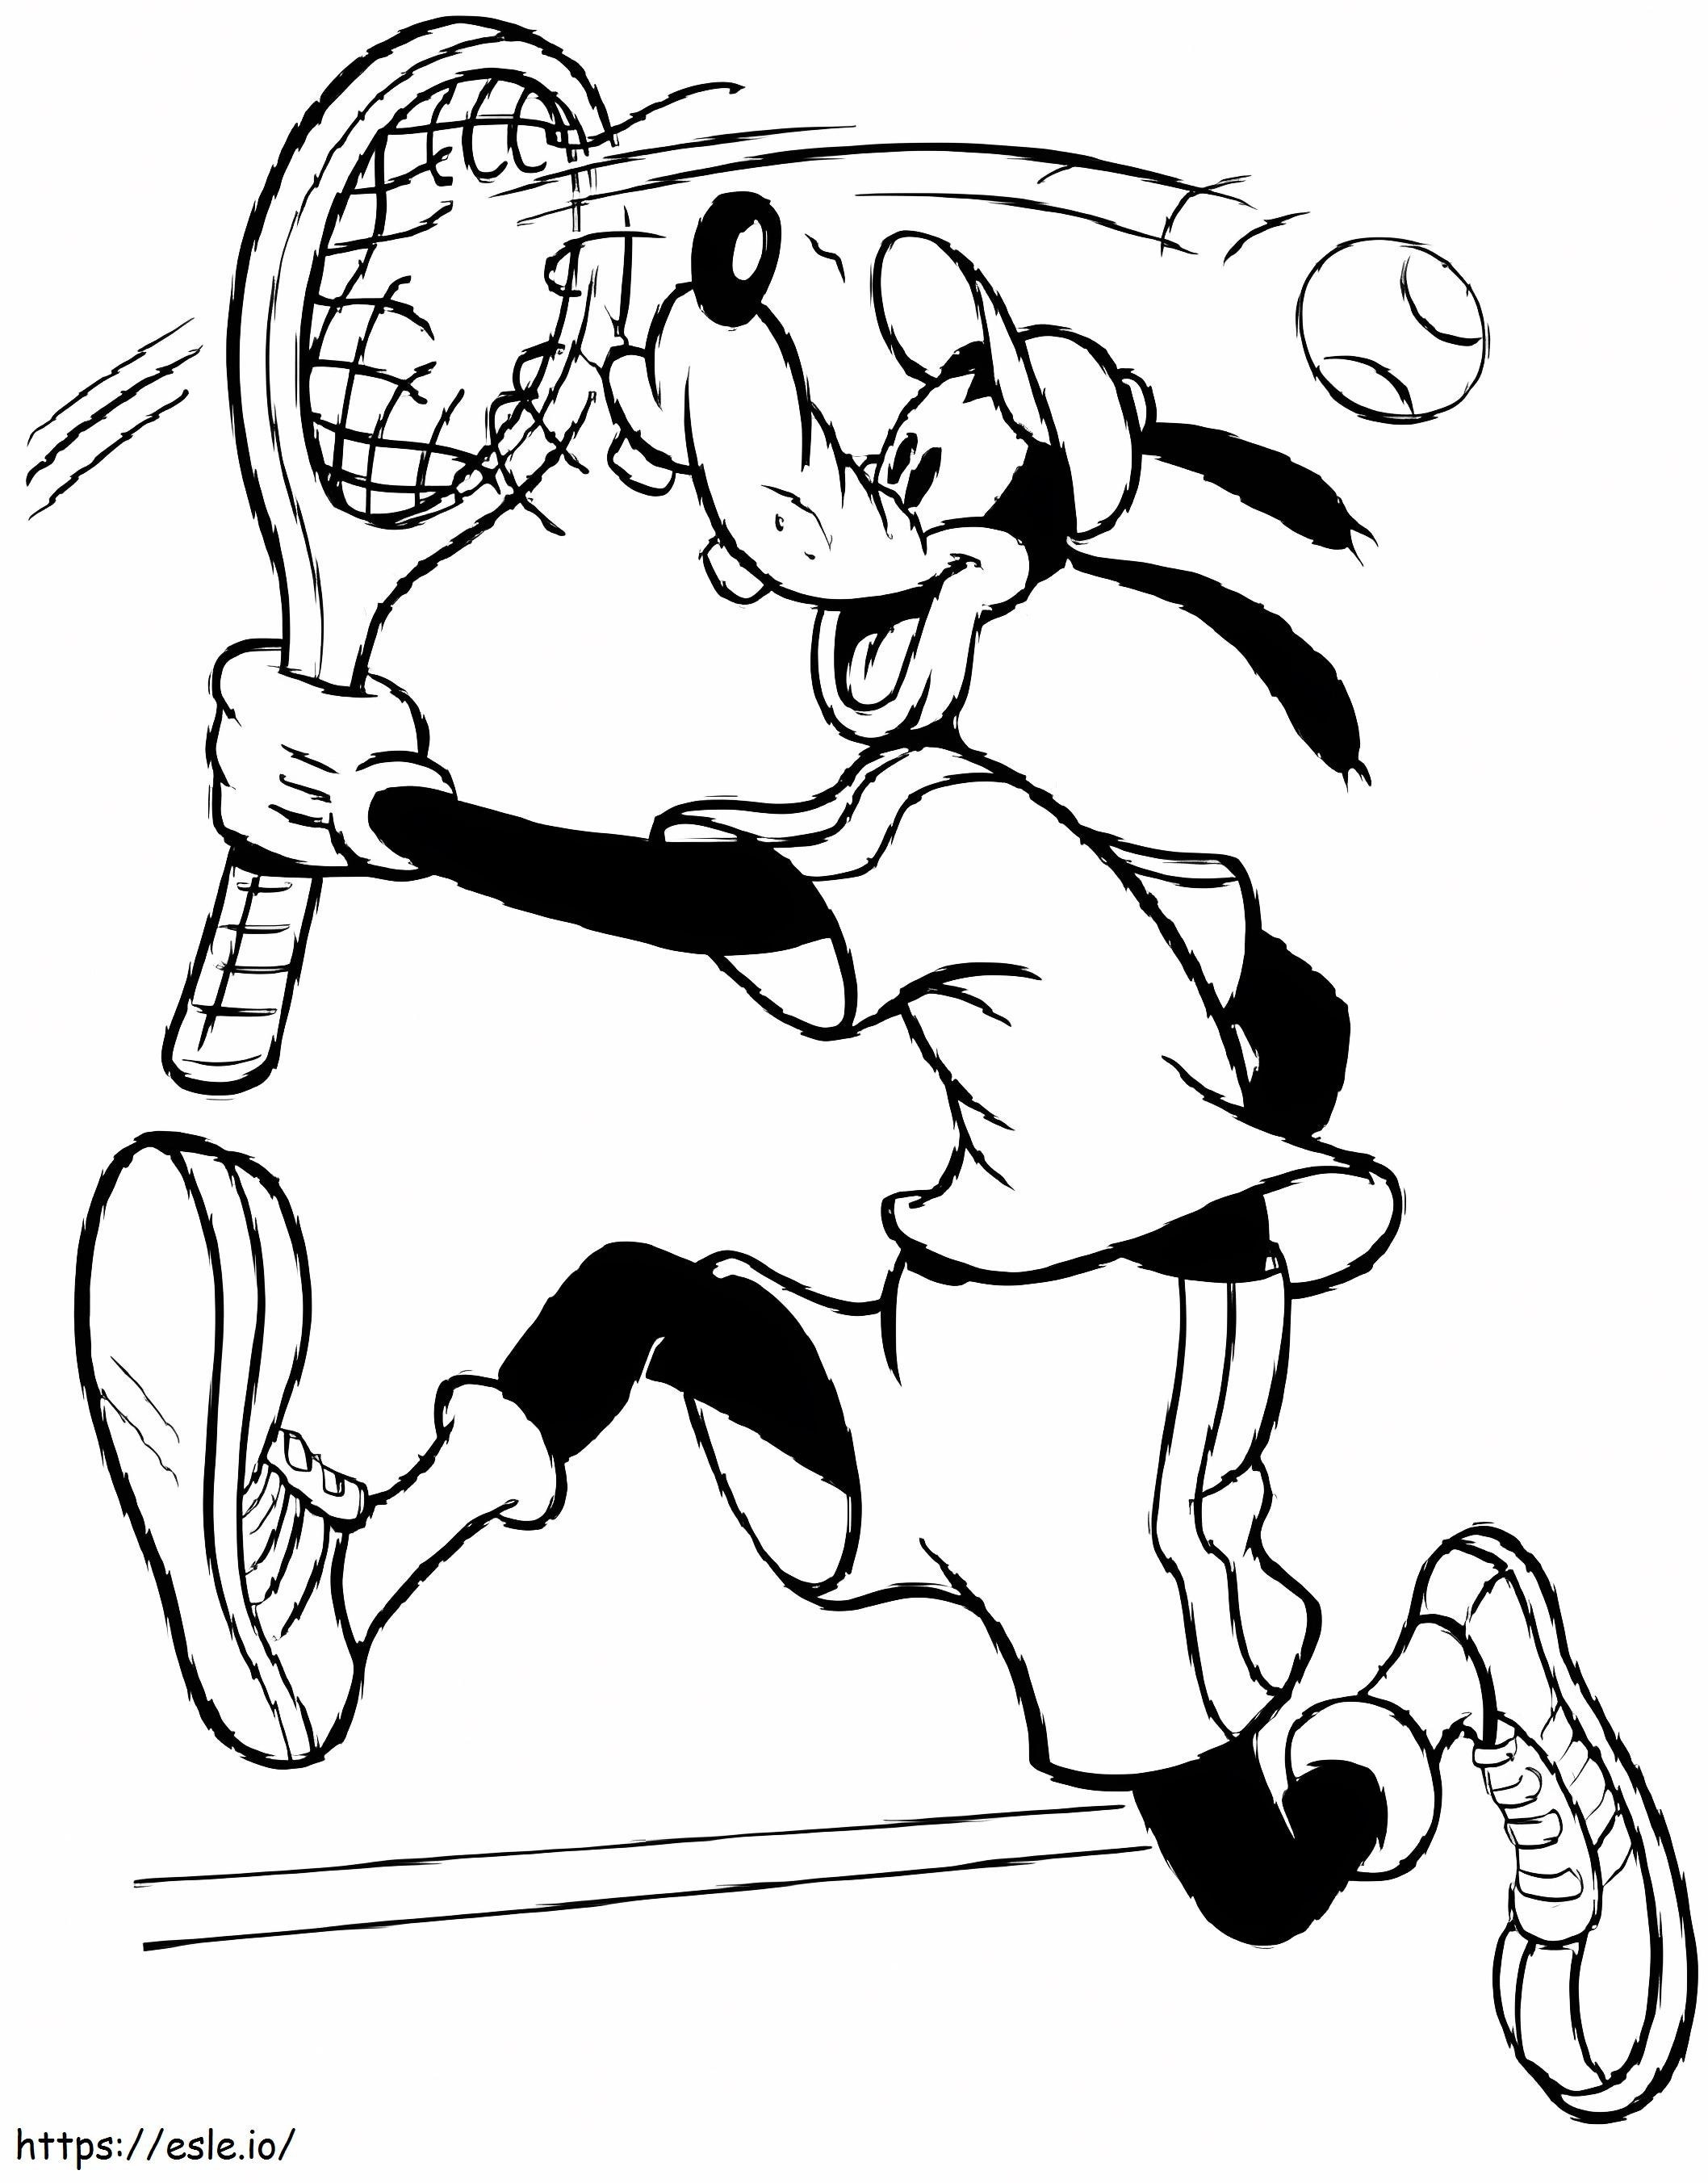 Goofy Playing Tennis coloring page